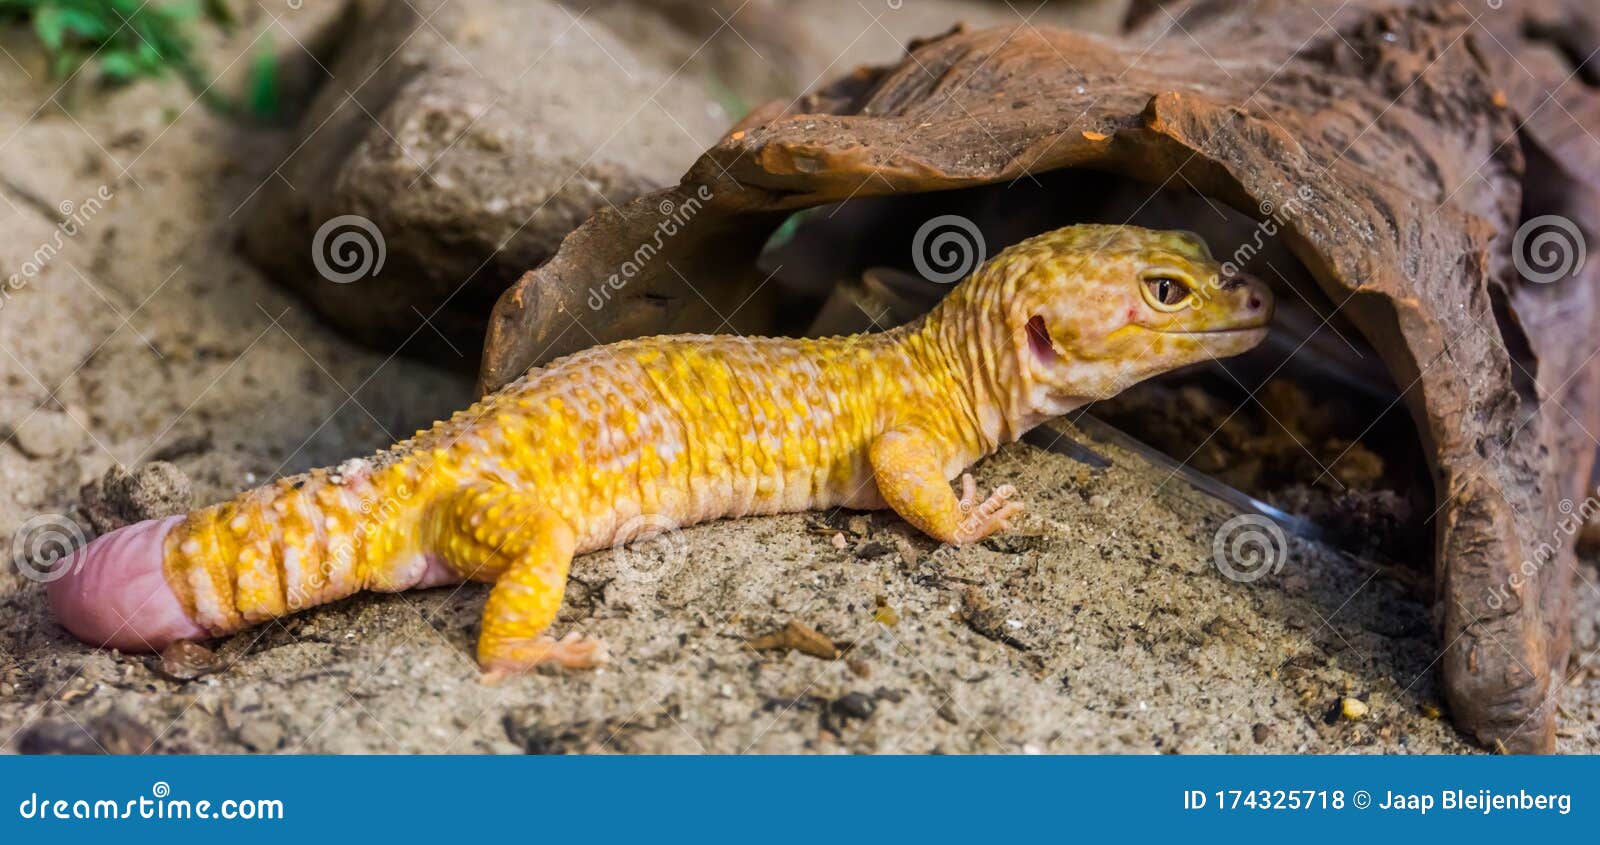 beautiful portrait of a leopard gecko, popular tropical reptile specie from asia